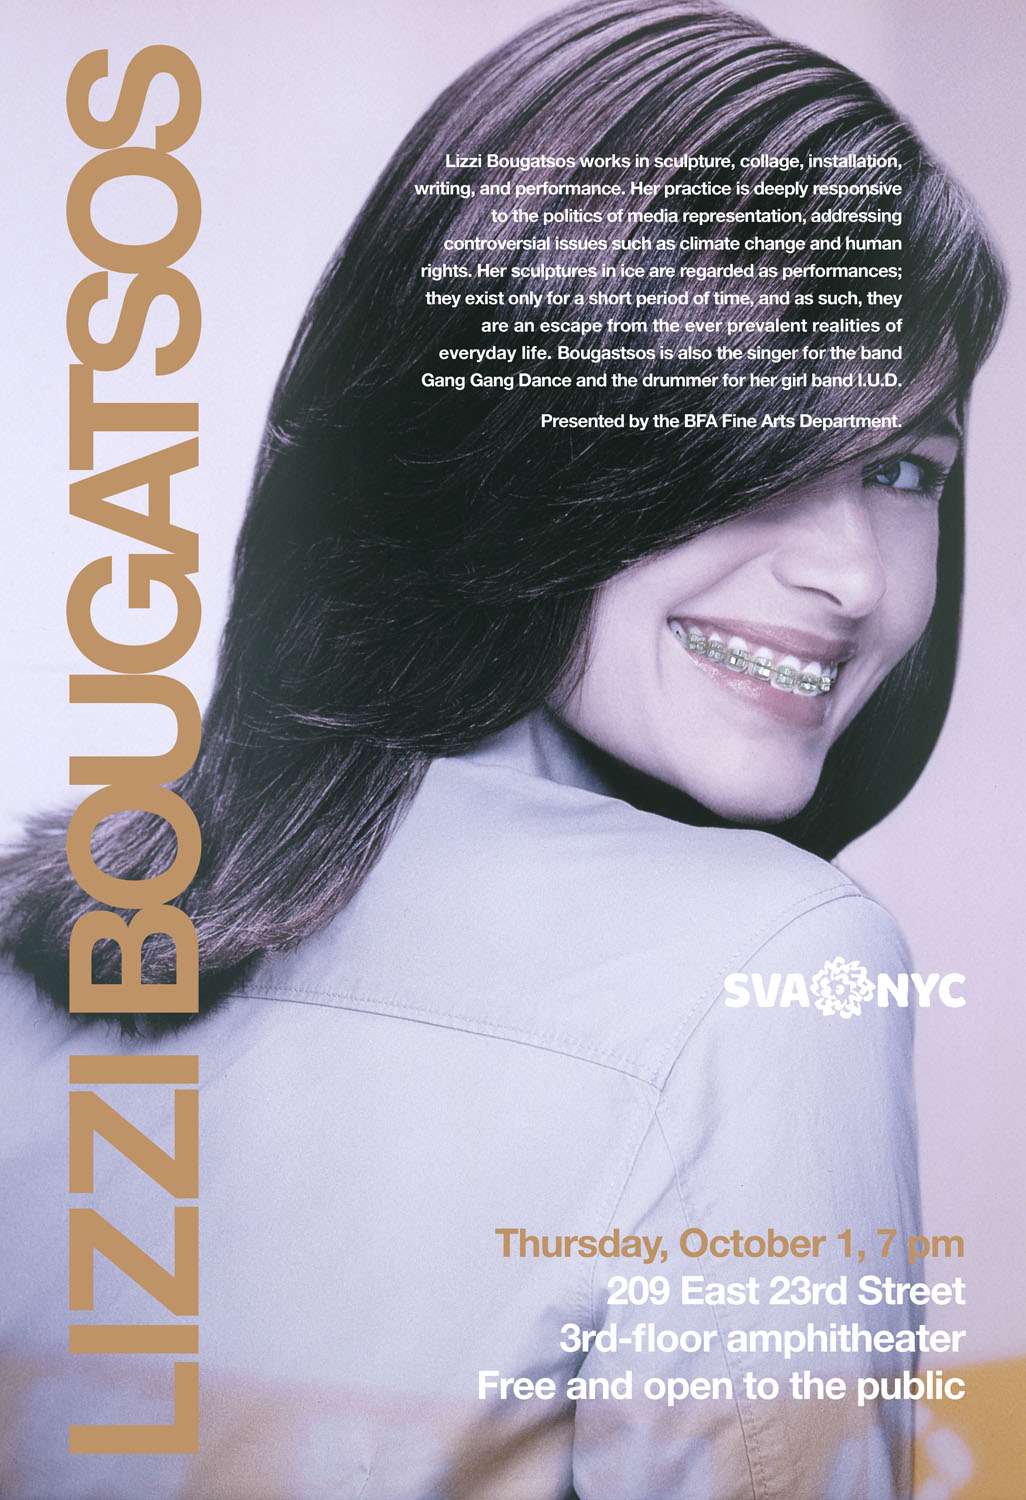 An advertisement for an exhibition at the 209 East 23rd Street, 3rd-floor amphitheater, titled Lizzi Bougatsos. The exhibition is on view from October 1, starting at 7 pm.